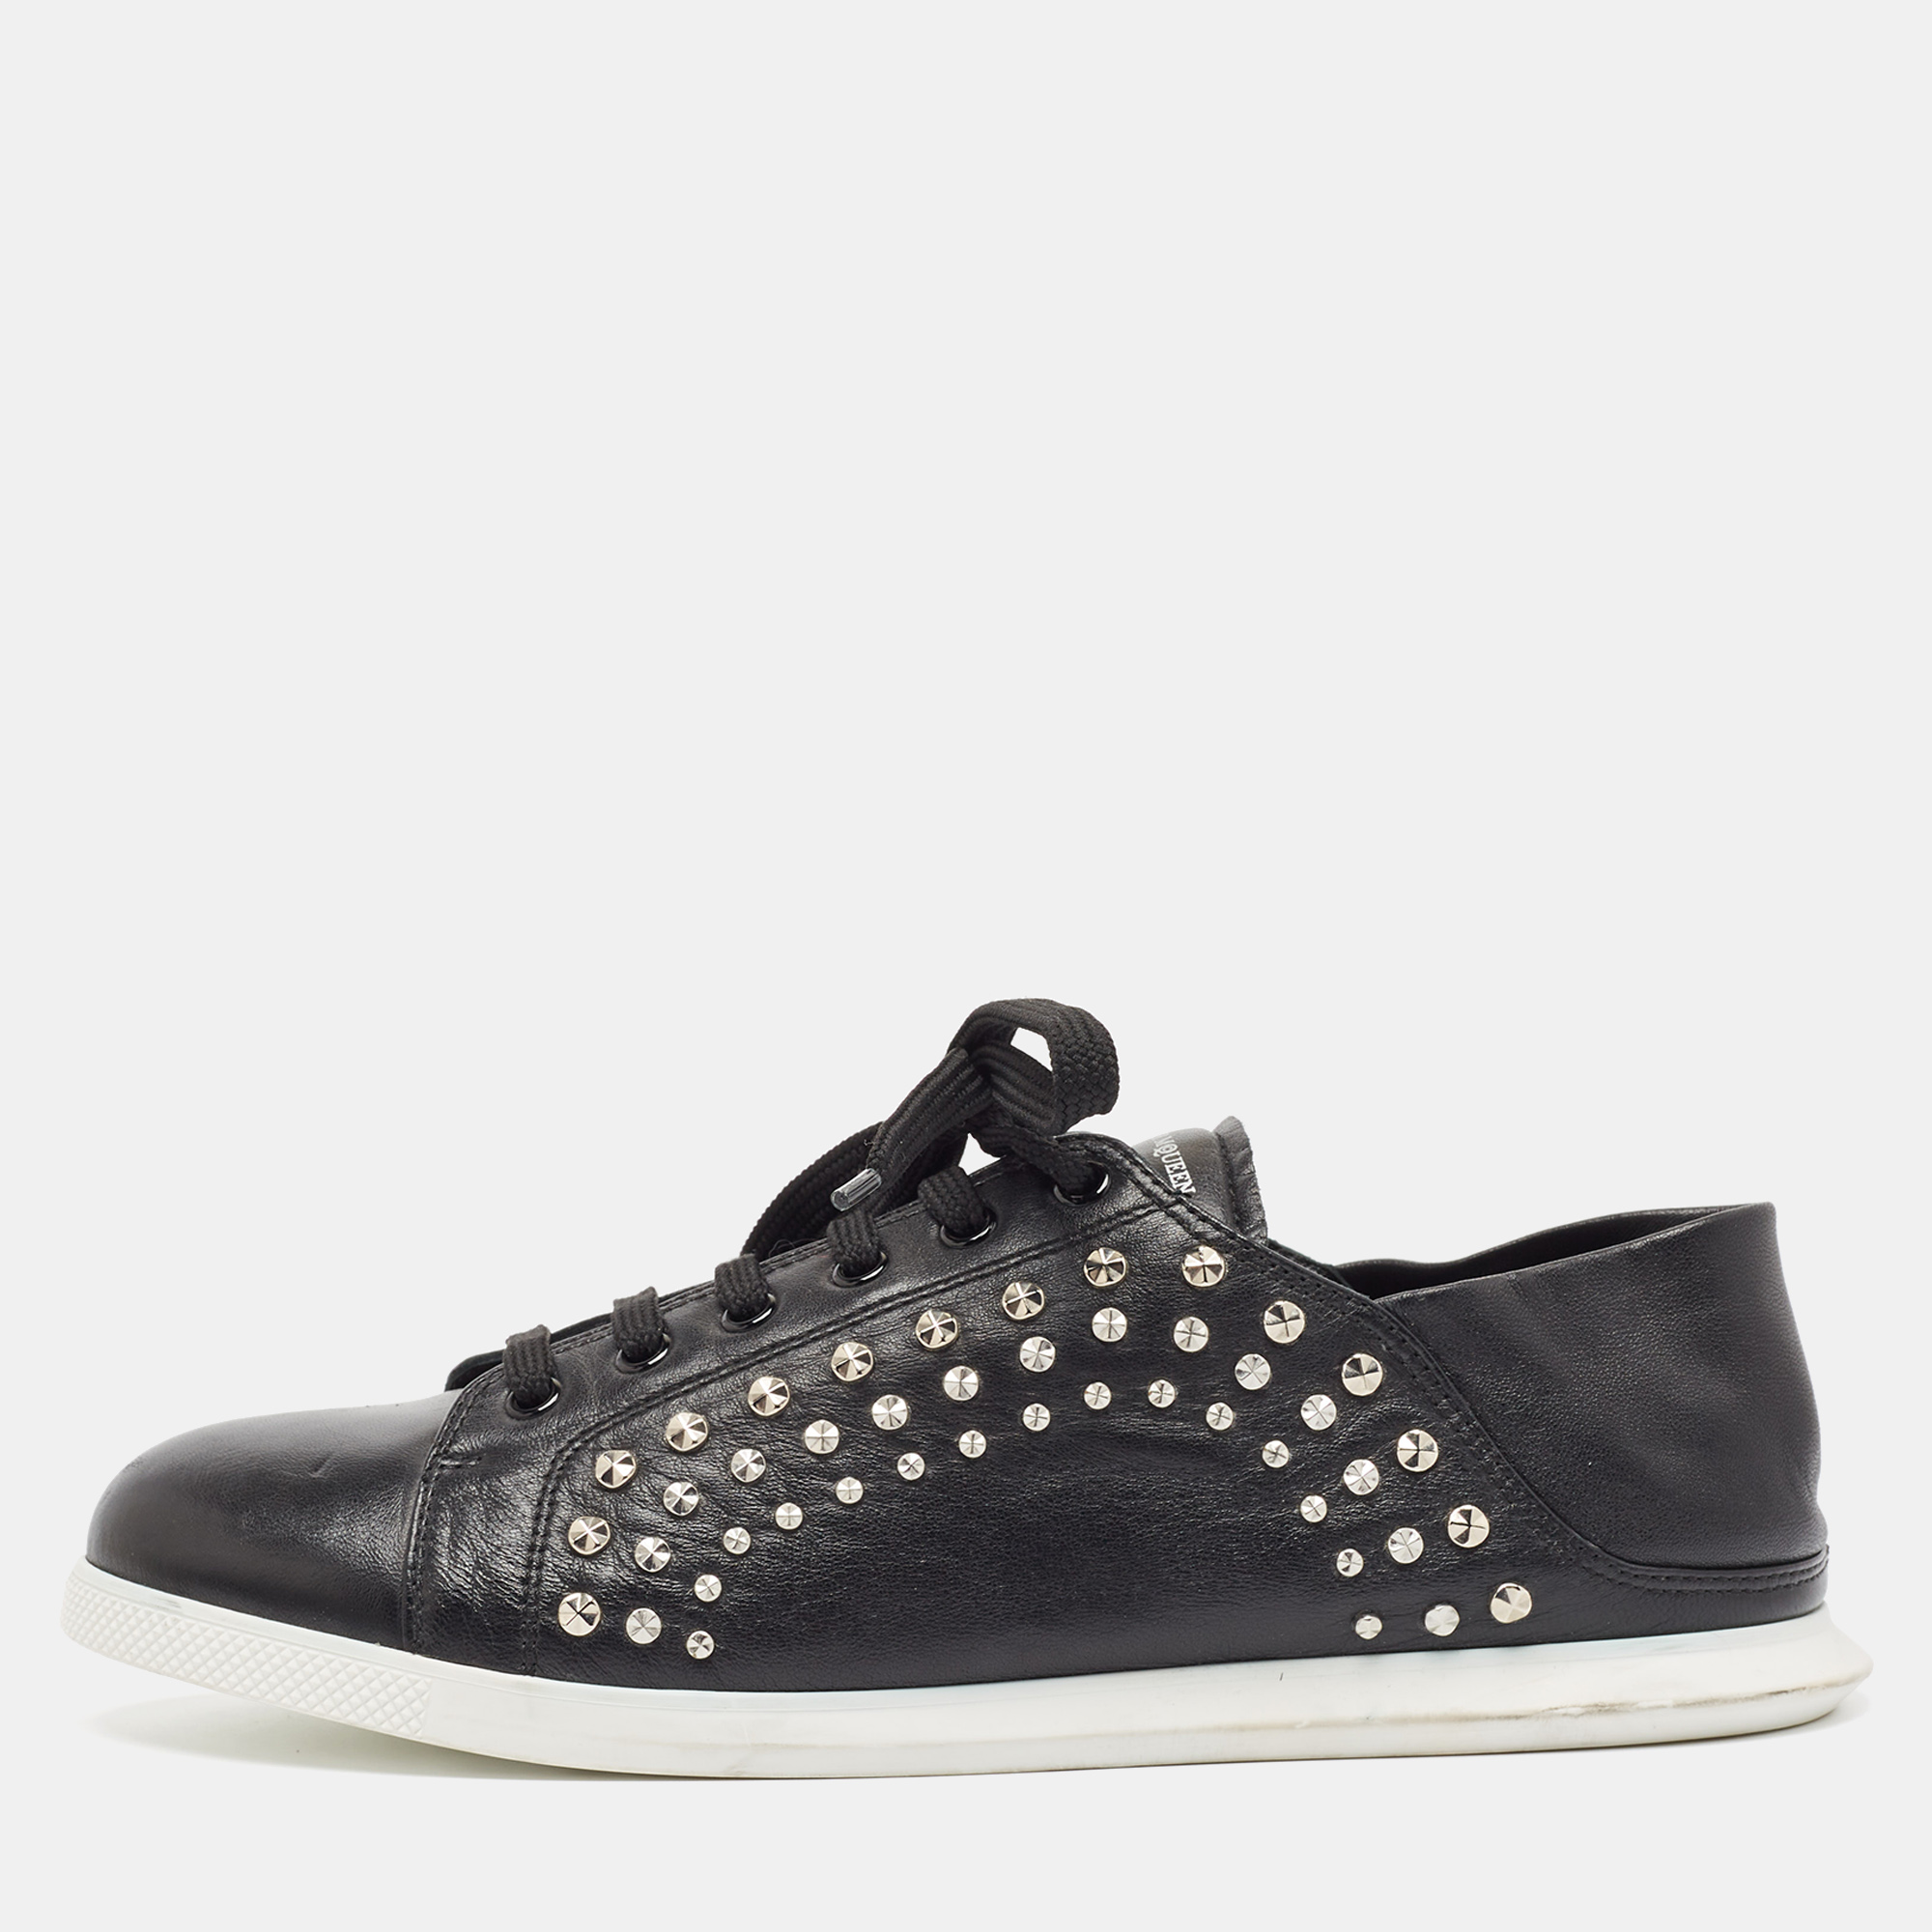 

Alexander McQueen Black Leather Studded Low Top Sneakers Size